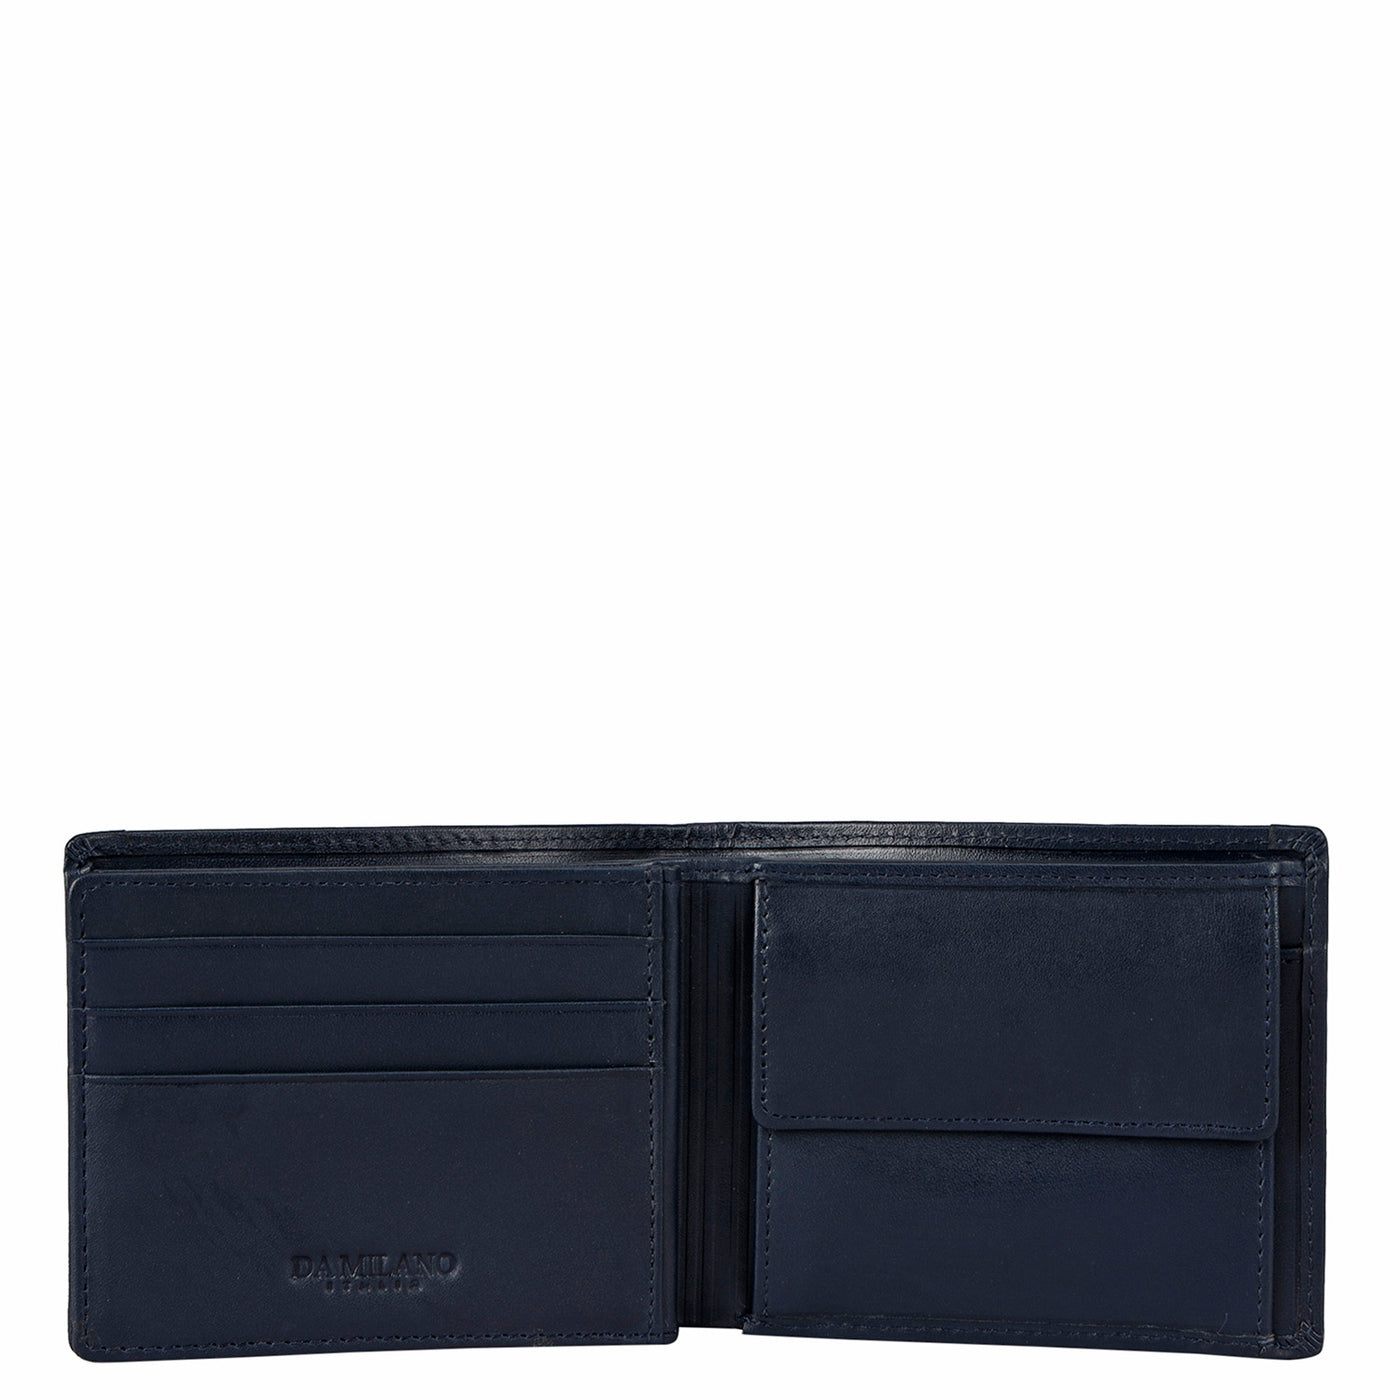 Fish Leather Mens Wallet - Blue